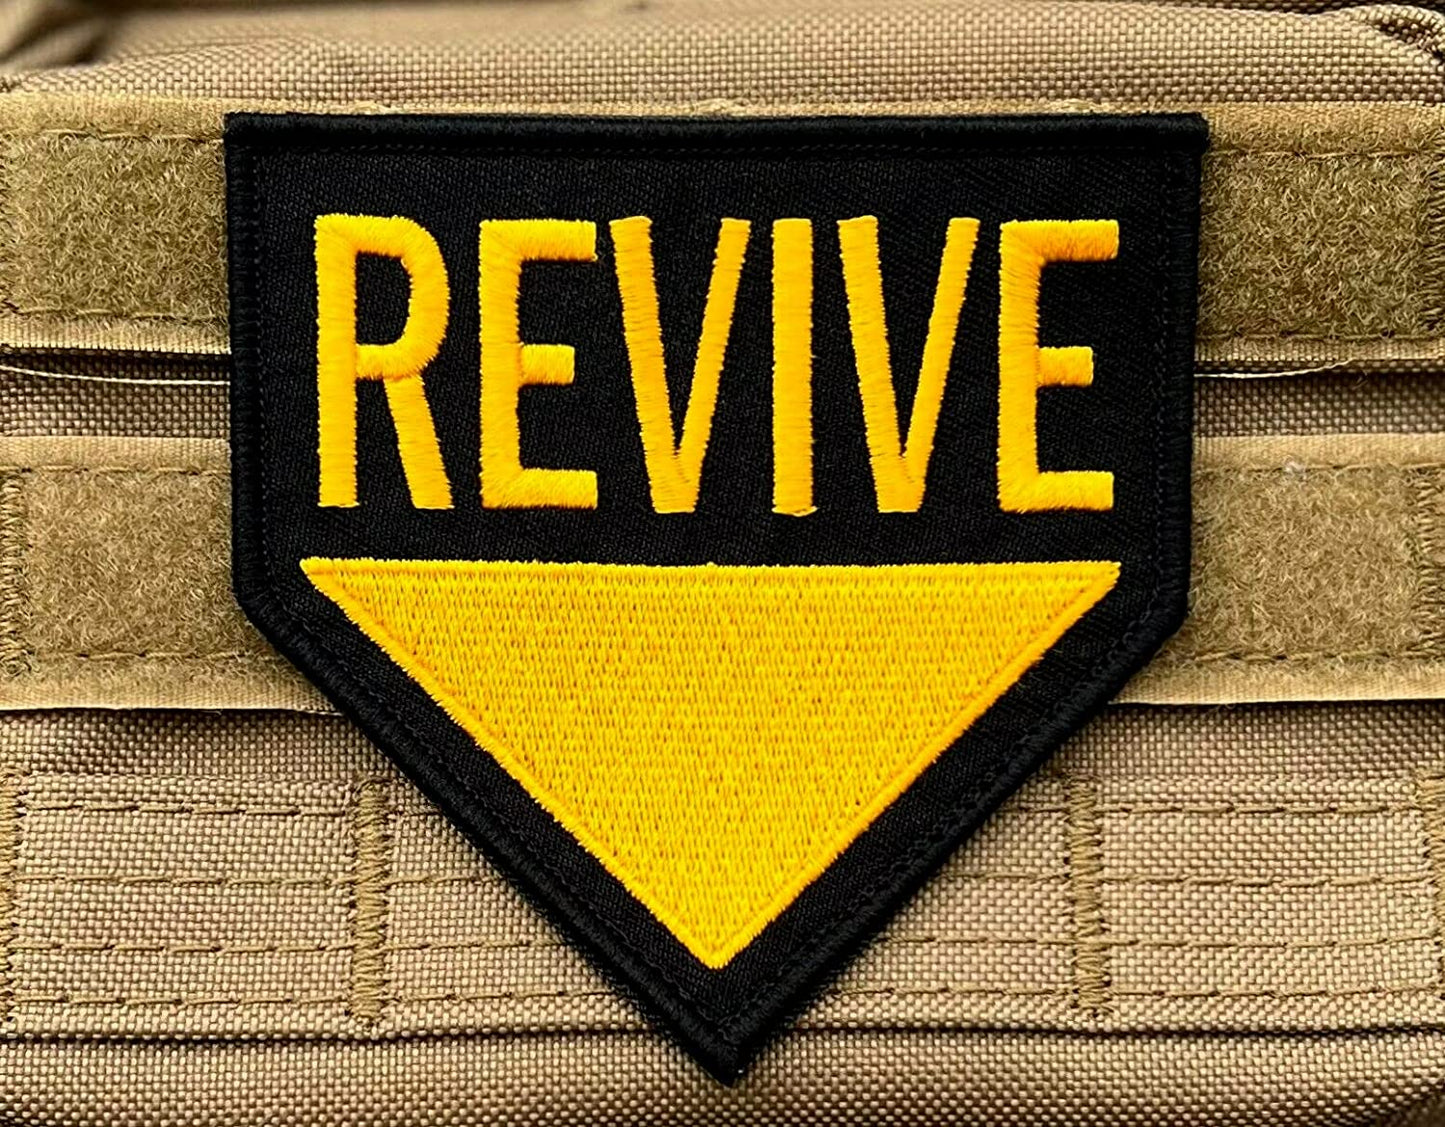 Revive Me! Patch (3.5 Inch) Hook & Loop Velcro Badge Army SpecOps Black Ops Tactical Patches